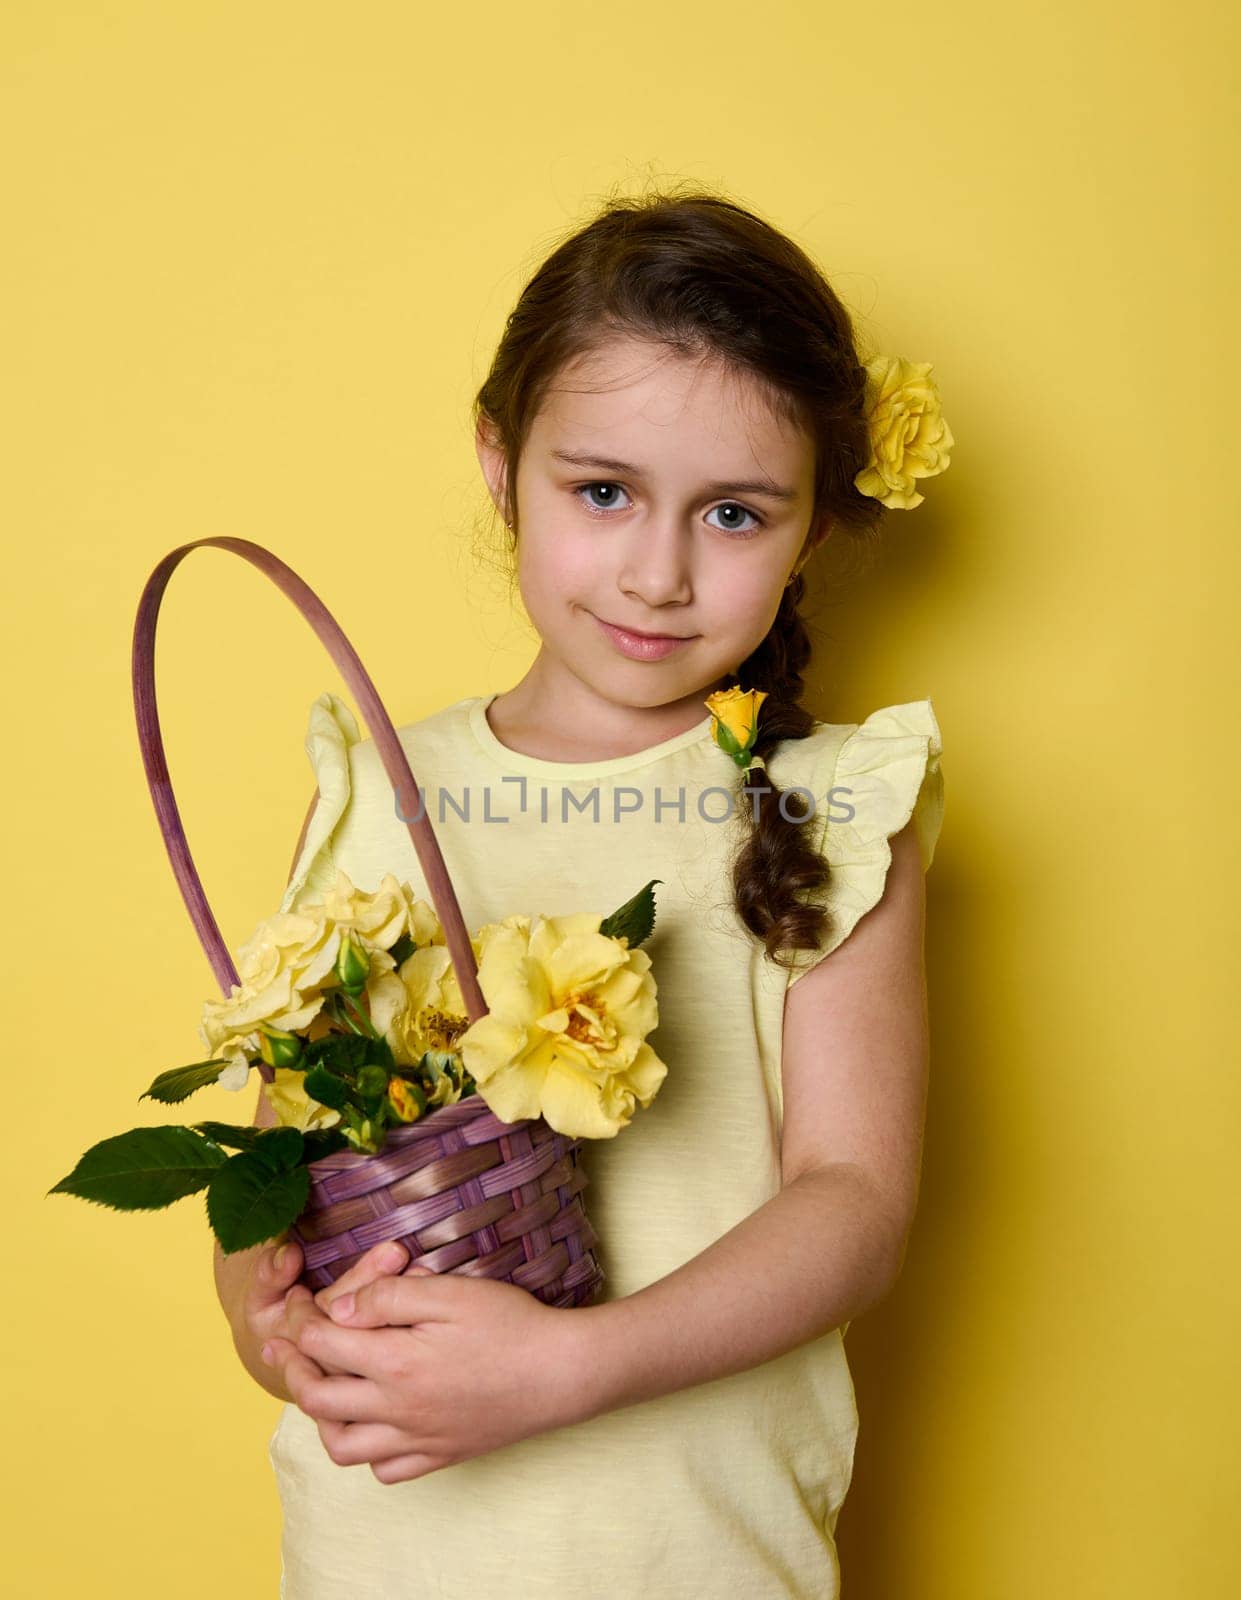 Beauty portrait Caucasian noble charming little girl in yellow elegant wear and flowers in hair, holding bouquet of yellow roses in purple wicker basket, smiling looking at camera, isolated background